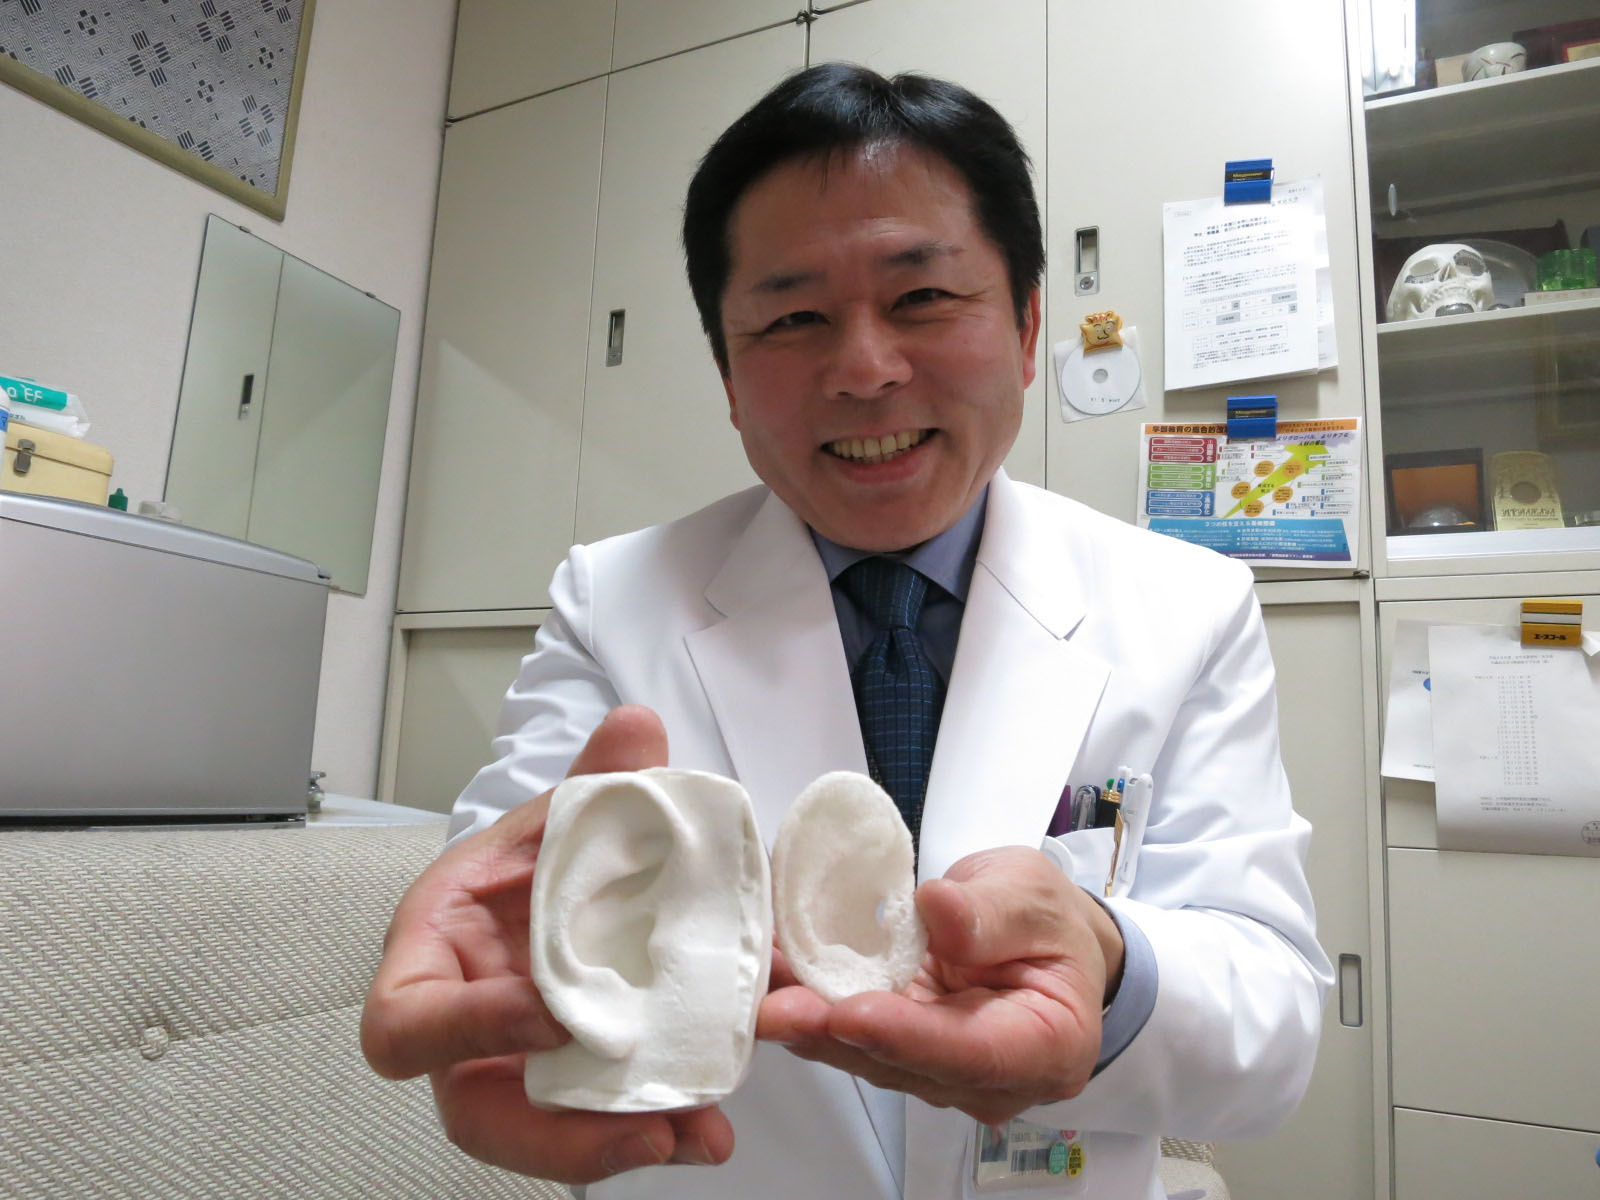 Tsuyoshi Takato, a professor of tissue engineering at the University of Tokyo School of Medicine, shows ear models. The one on the right was printed with polylactic acid, while the other was made with silicone in a mold. | KAZUAKI NAGATA